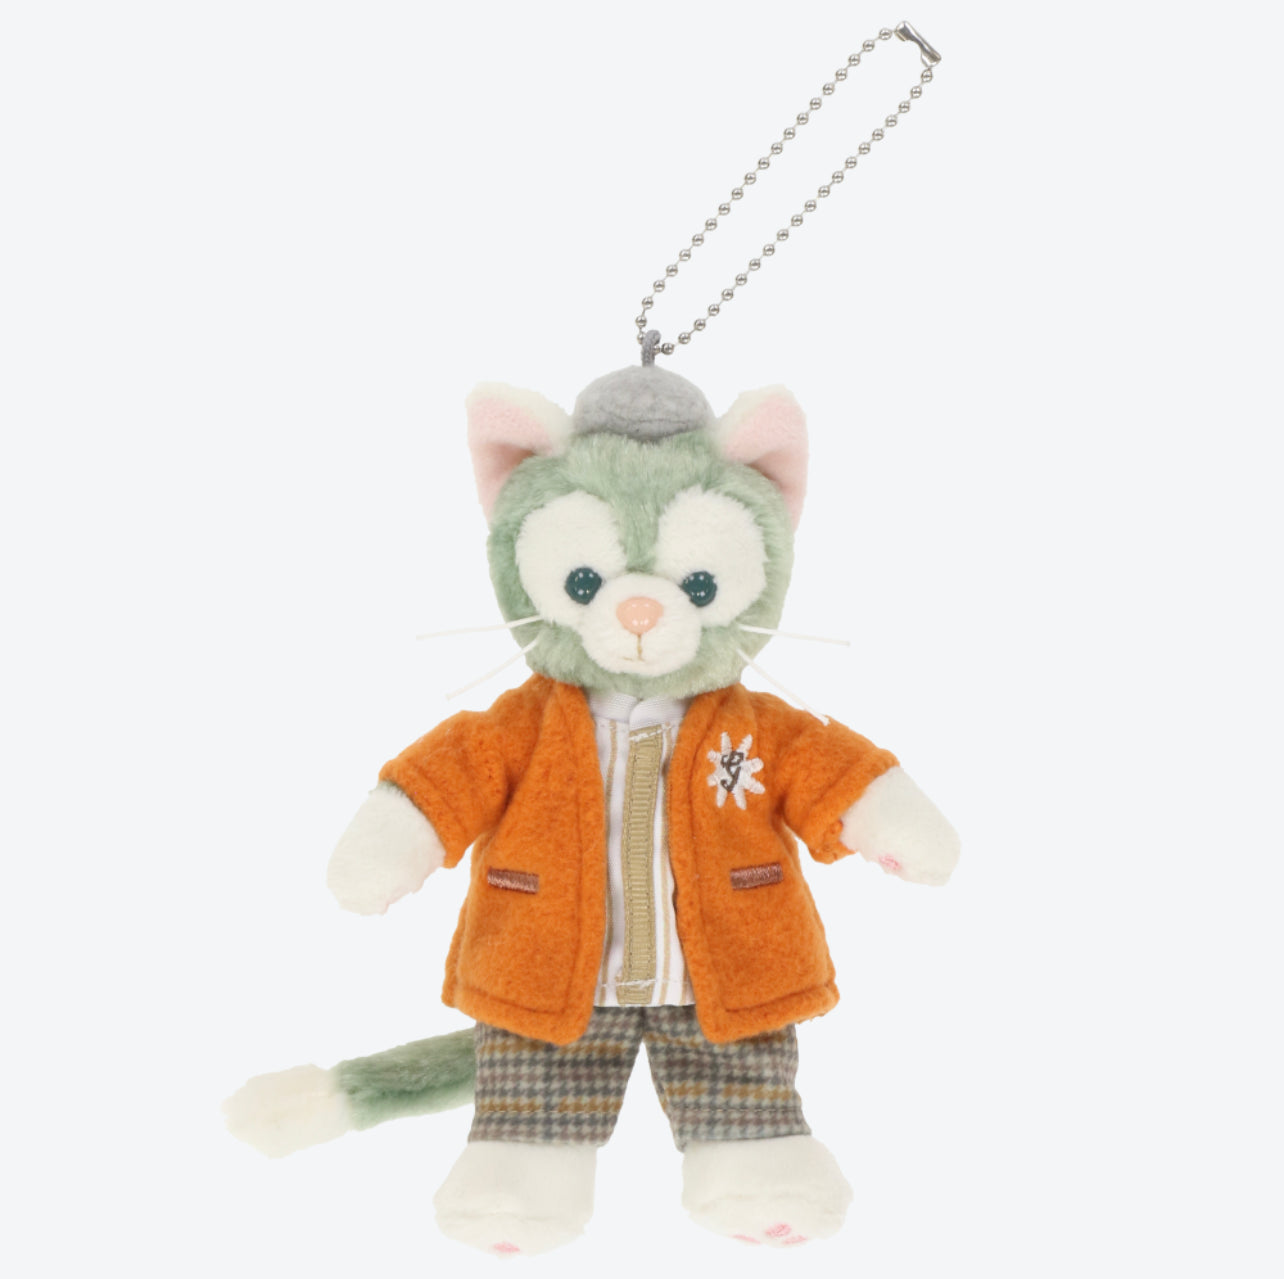 TDR - Duffy & Friends "Autumn Story Book" Collection x Gelatoni "Standing" Plush Keychain (Release Date: Sept 7)